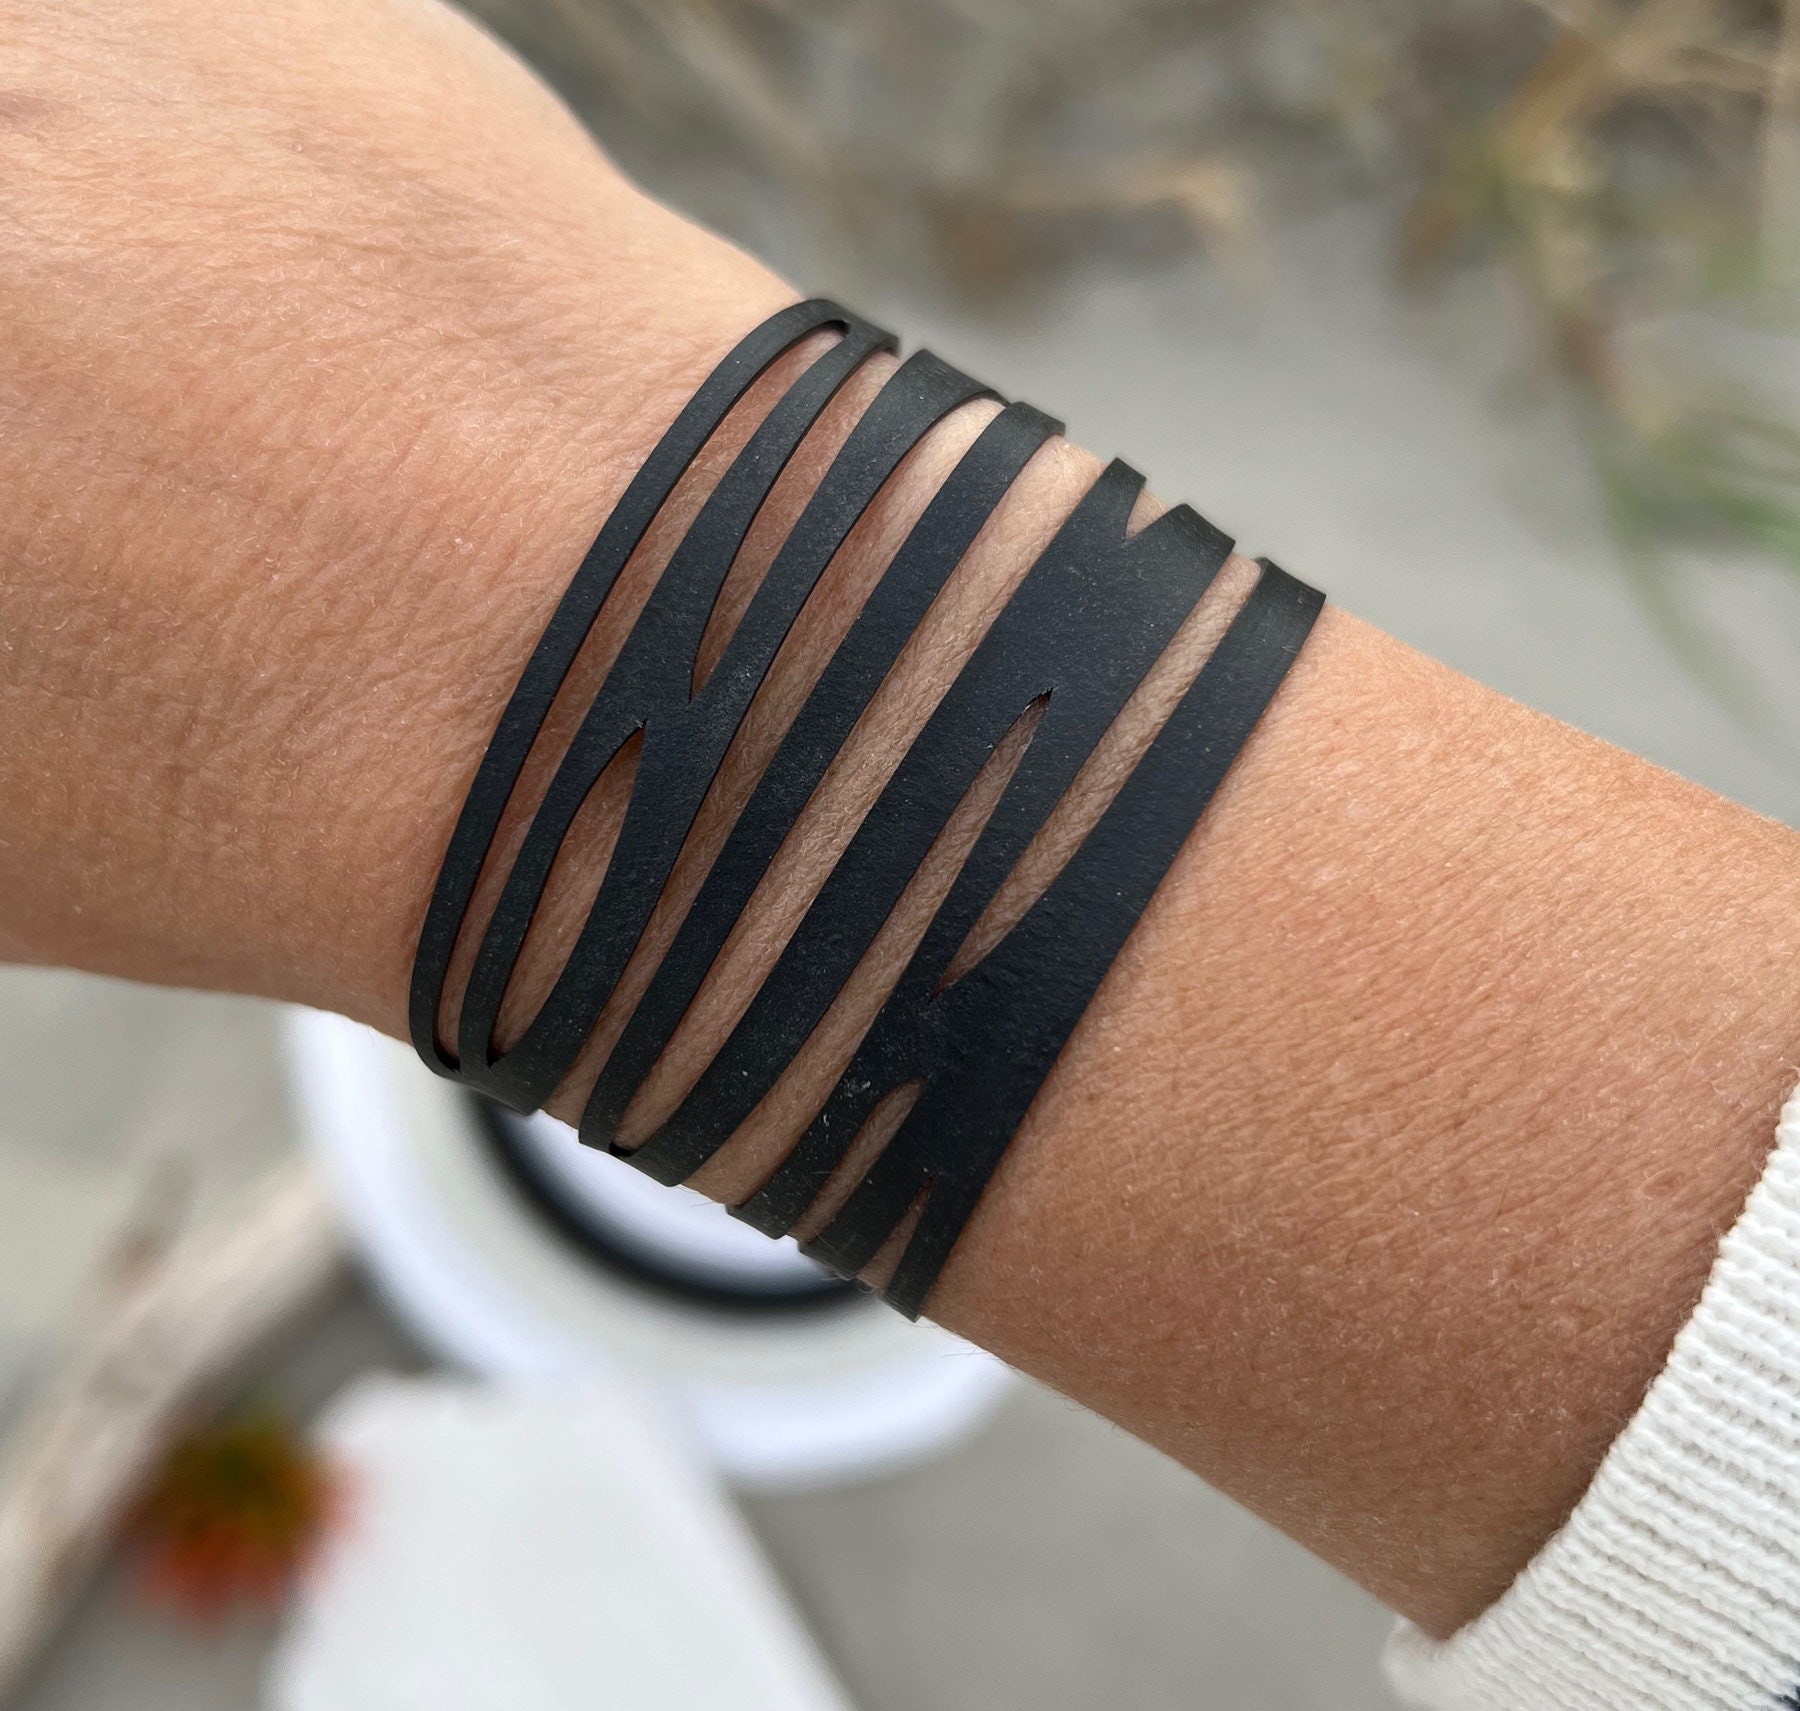 37 Stunning Armband Tattoos For Women - Our Mindful Life